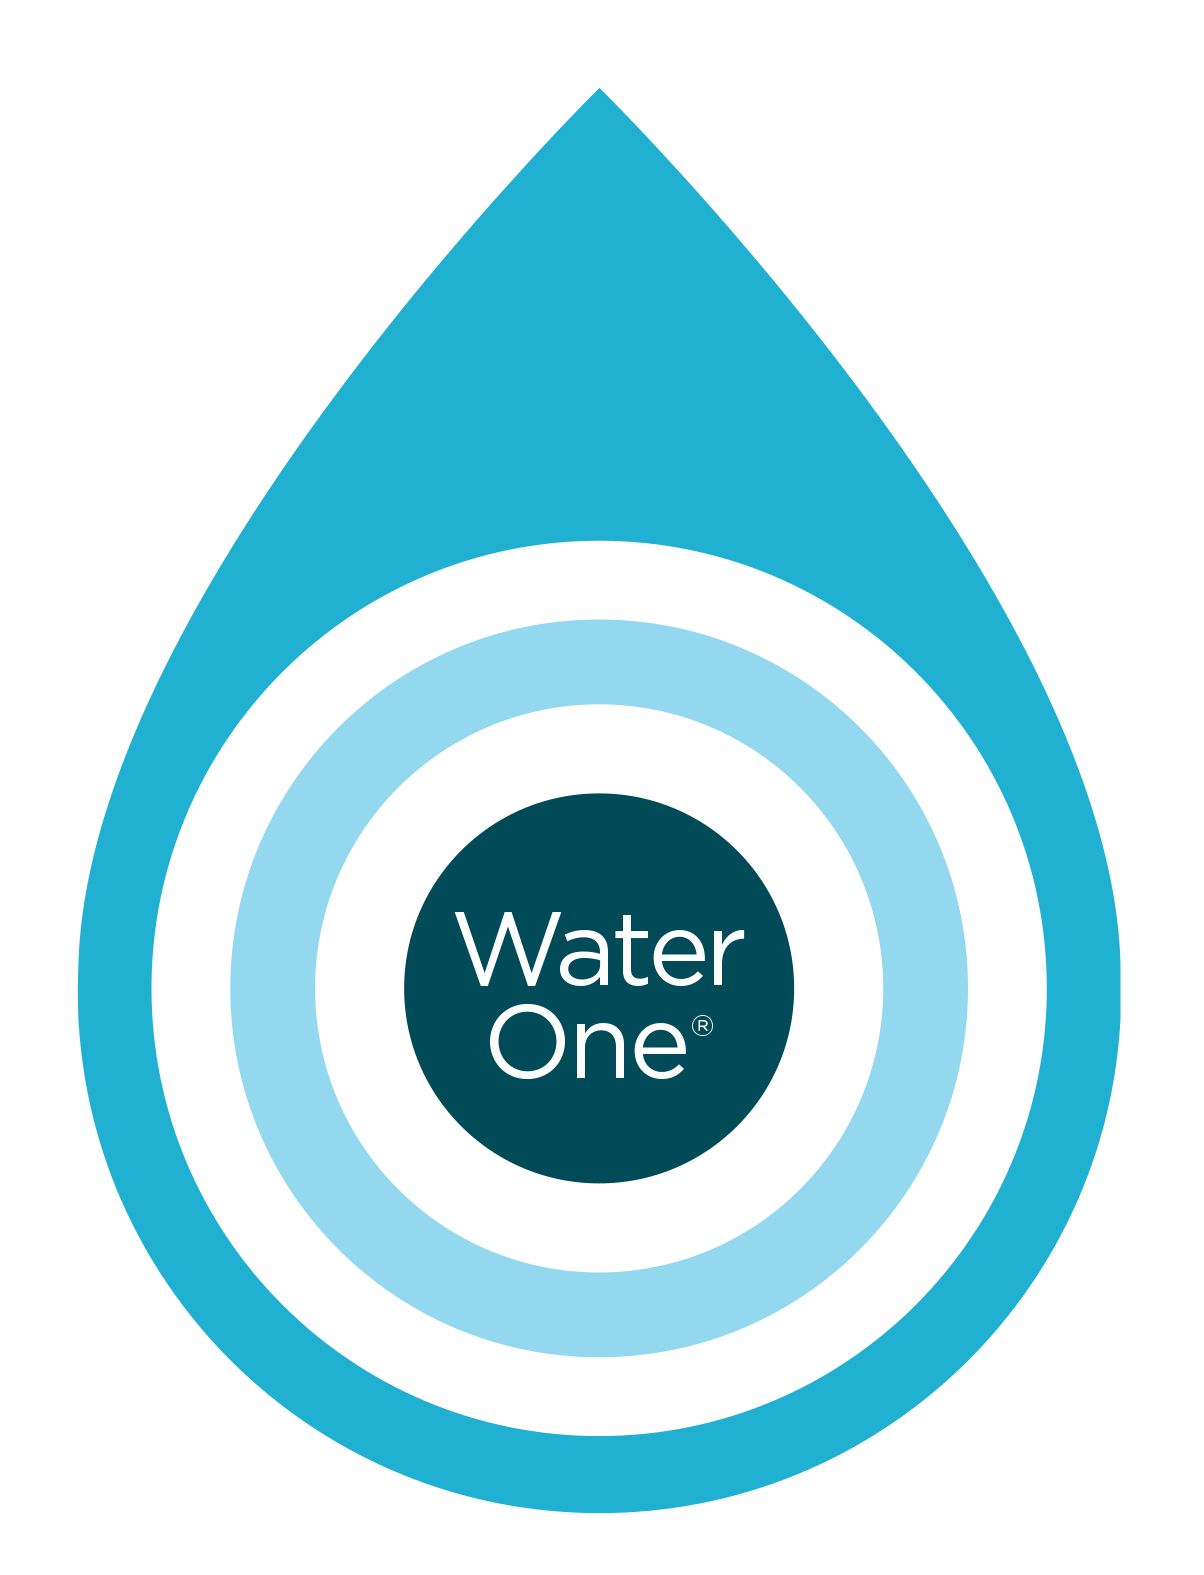 Evoqua's Water One service platform allows customers to outsource the management of their water treatment systems.